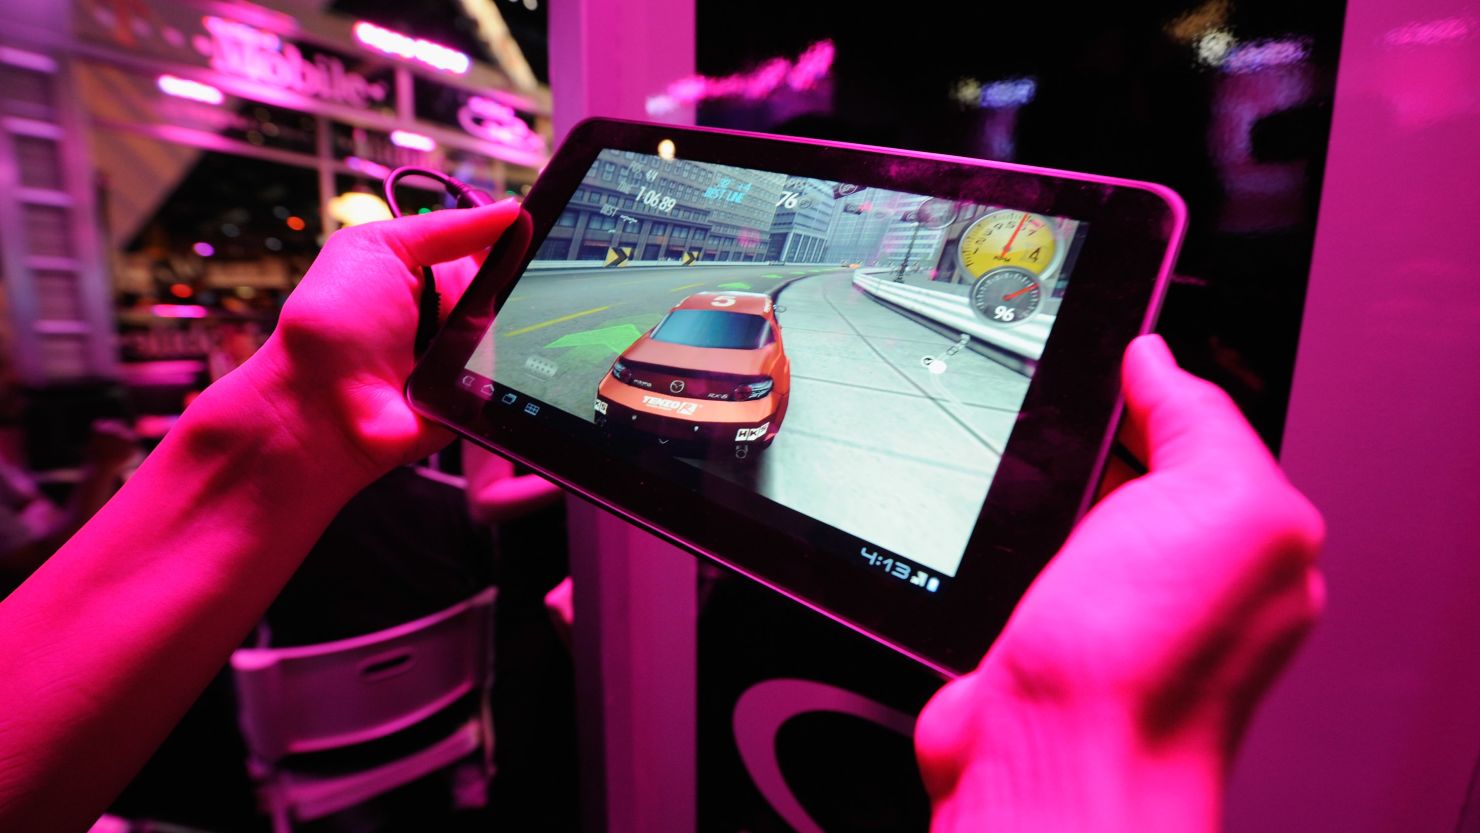 An exhibitor plays a racing game on a tablet at last year's E3. Gaming has been expanding from consoles to mobile devices.